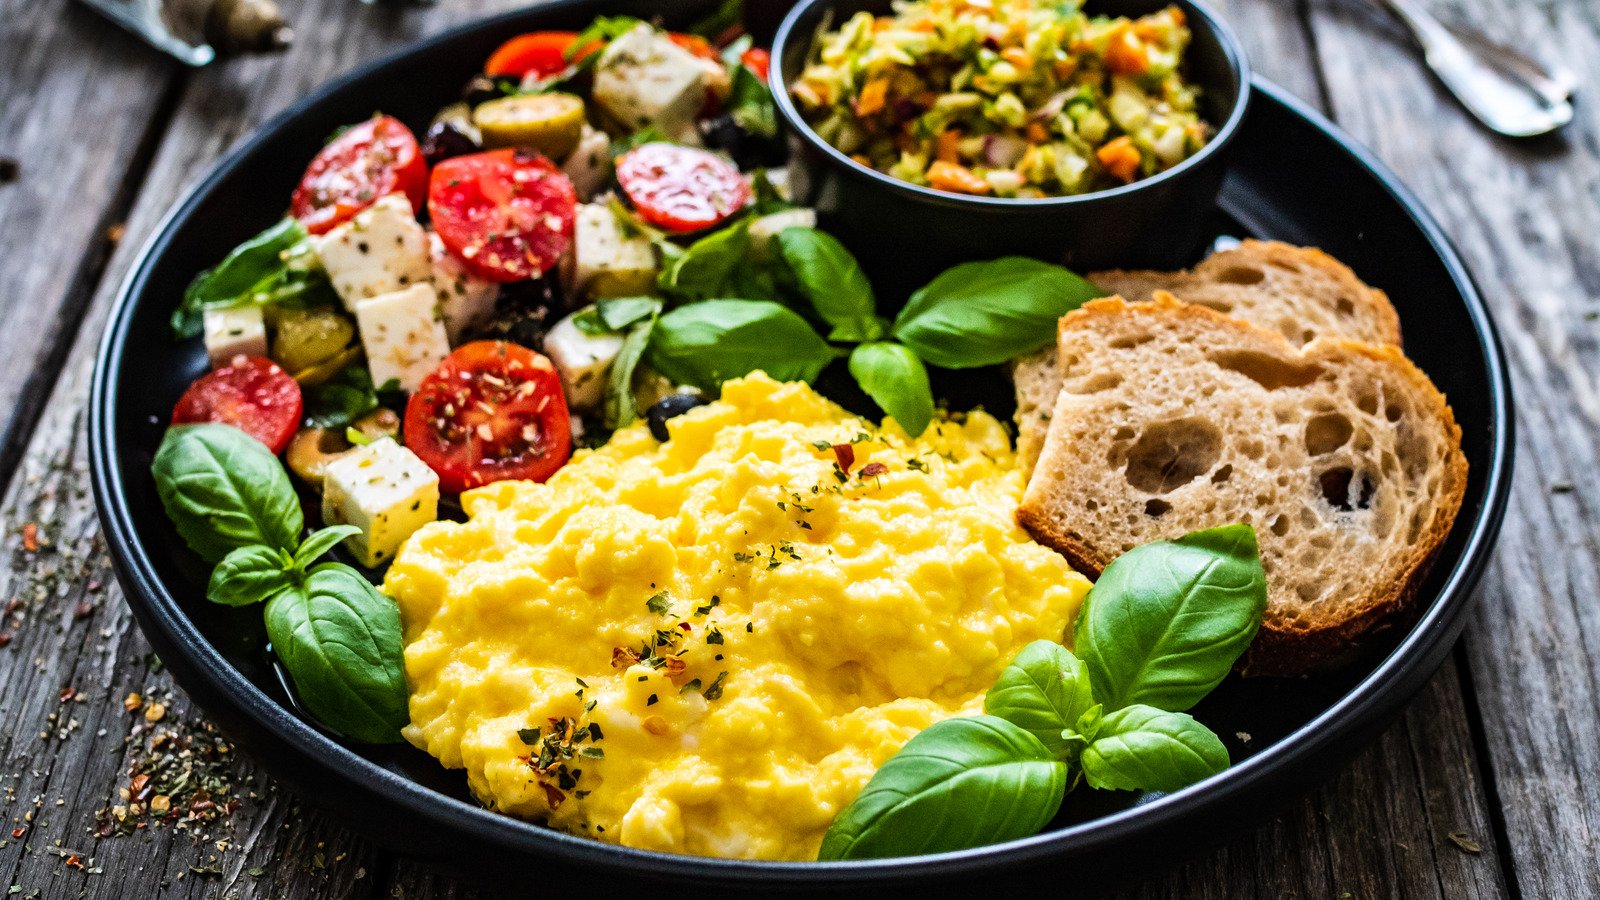 Why Scrambled Eggs Taste Better From A Restaurant Than At Home